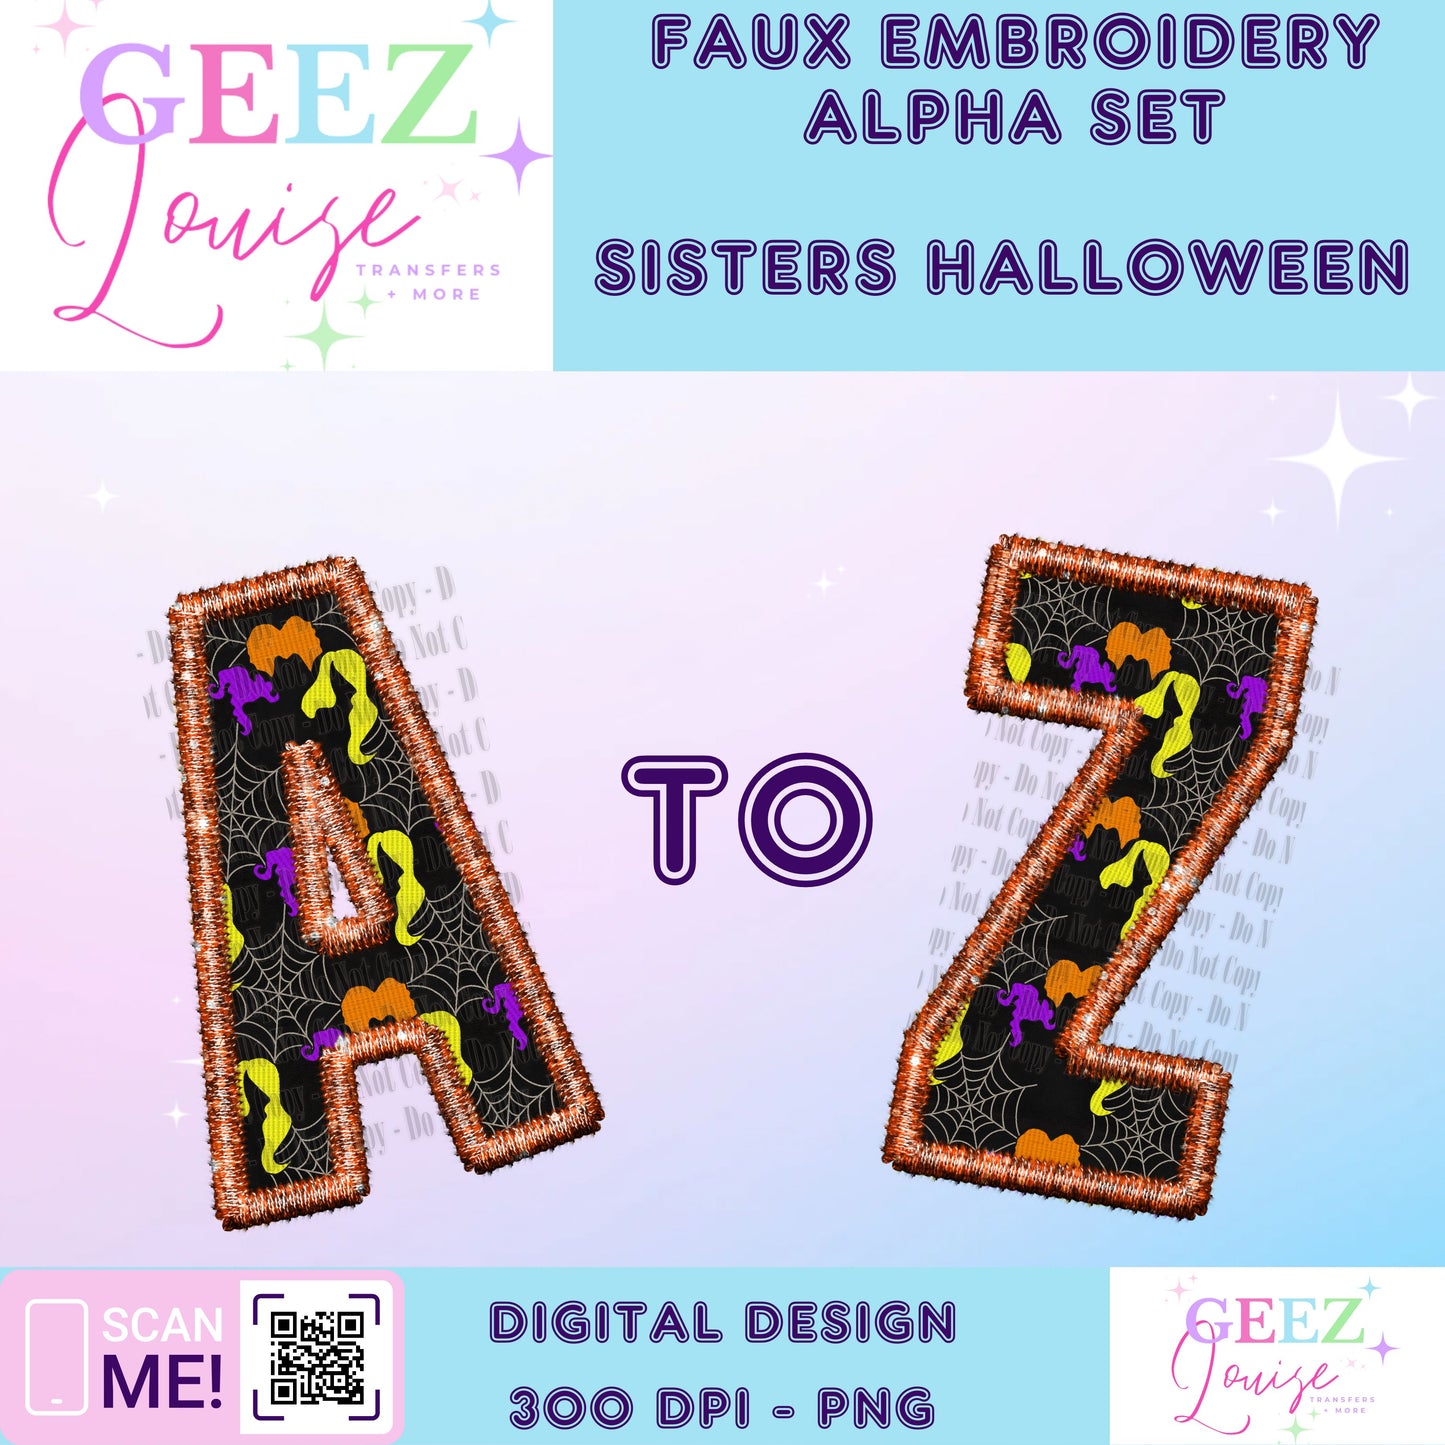 sisters Halloween spiderweb faux embroidery alpha set - Digital Download- PNG